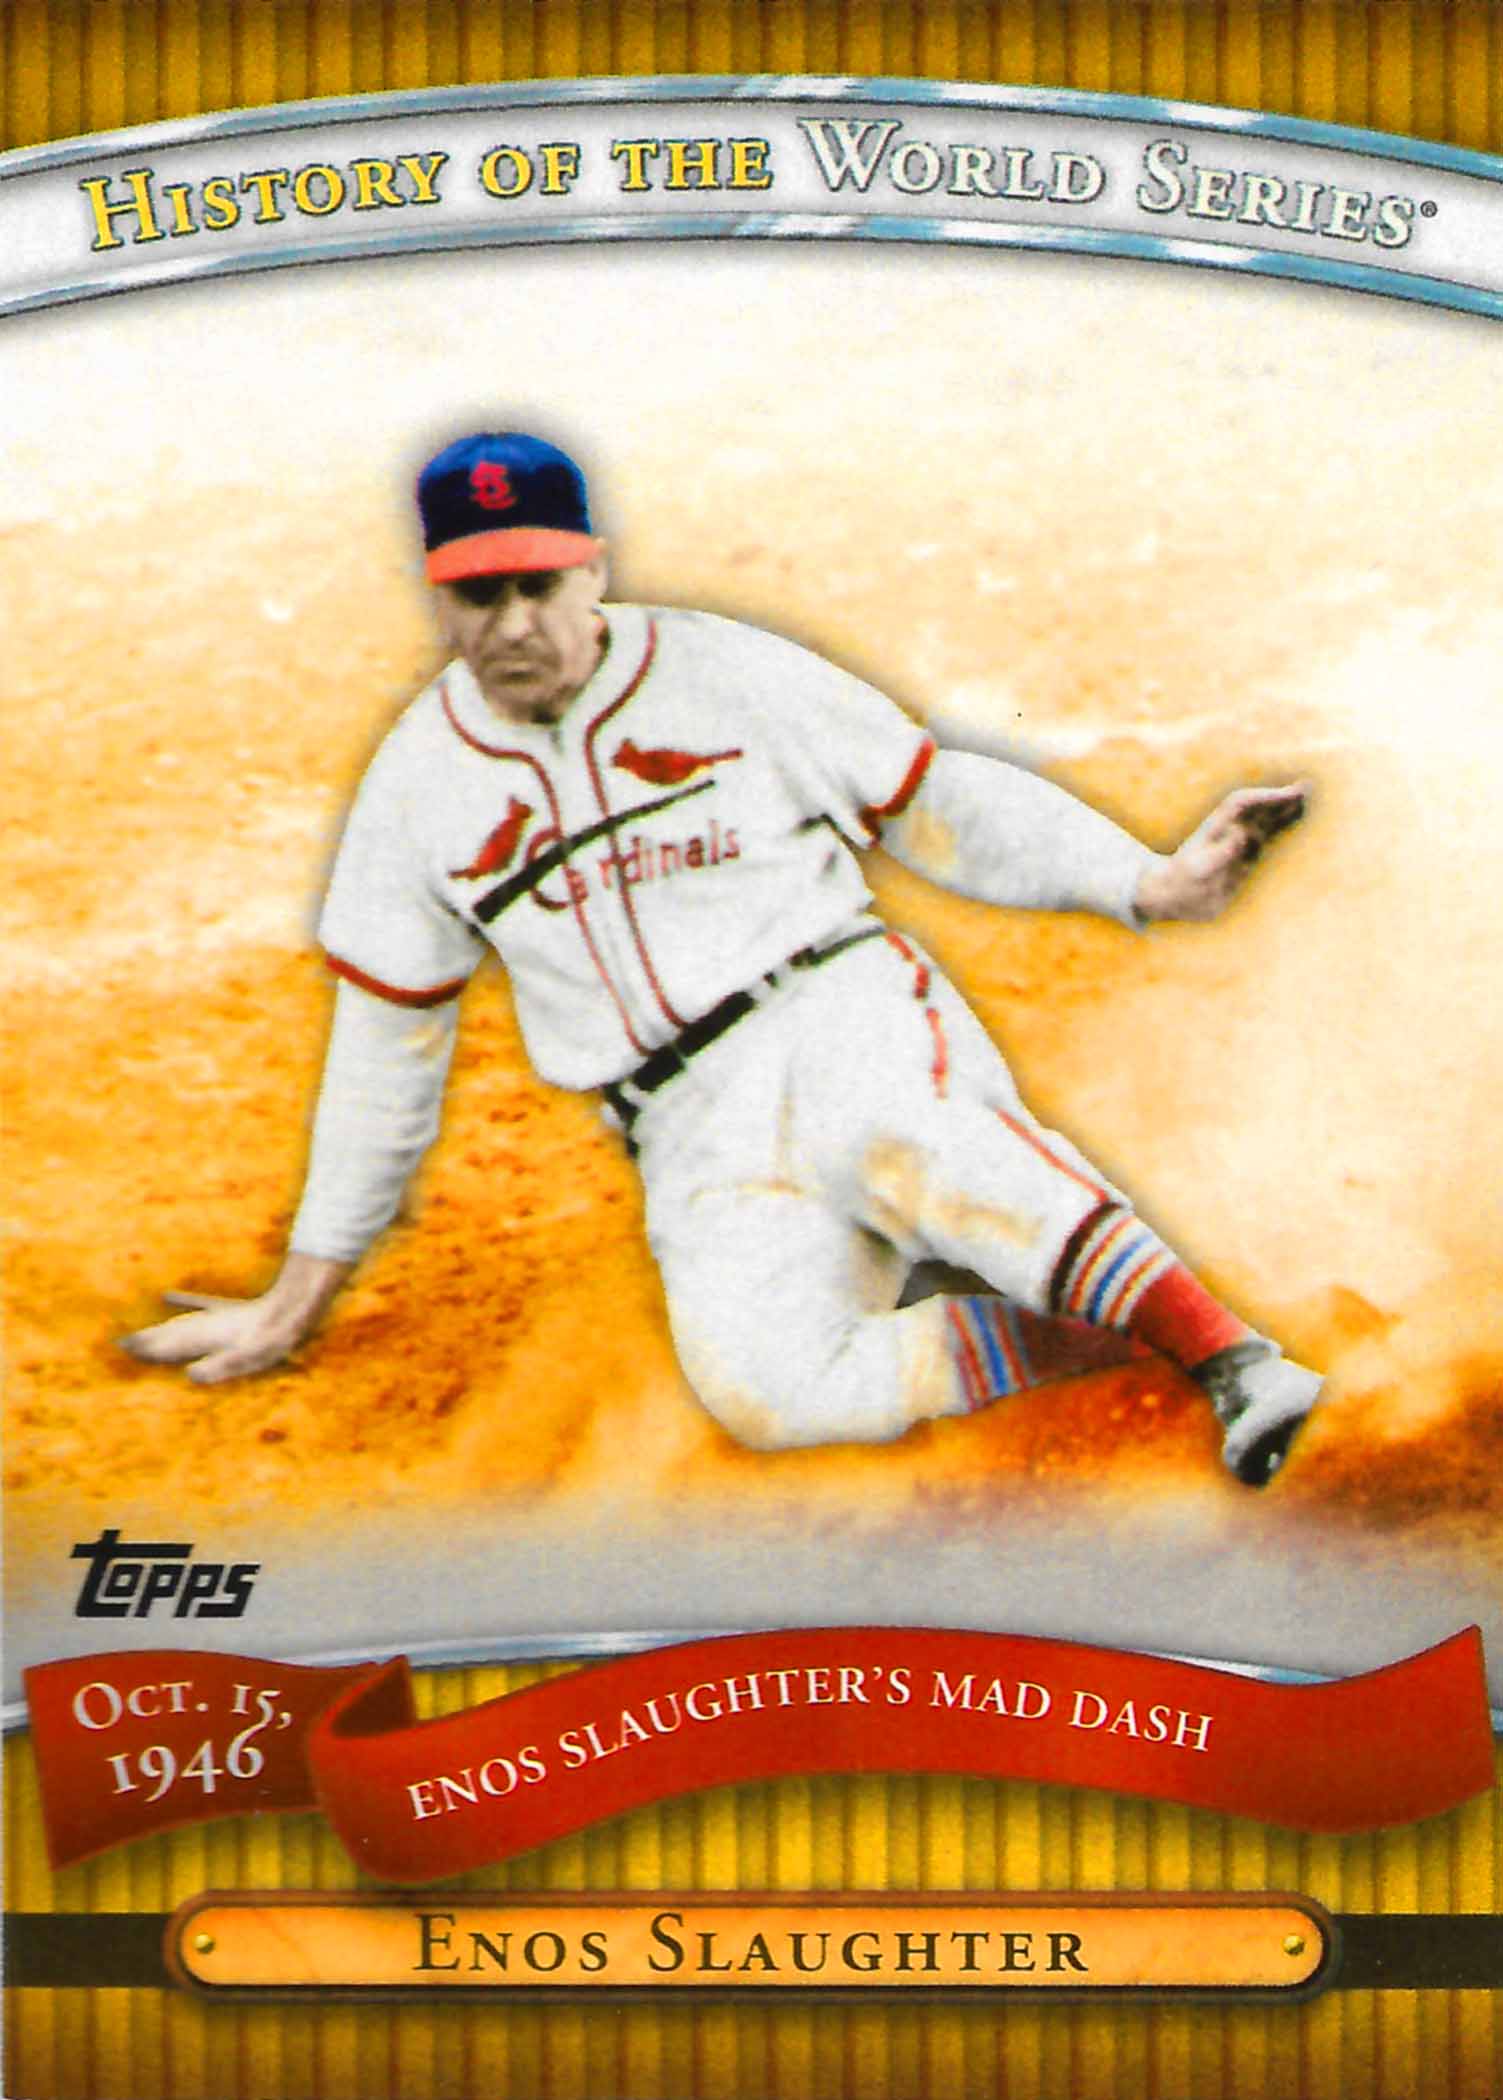 2010 Topps History of the World Series